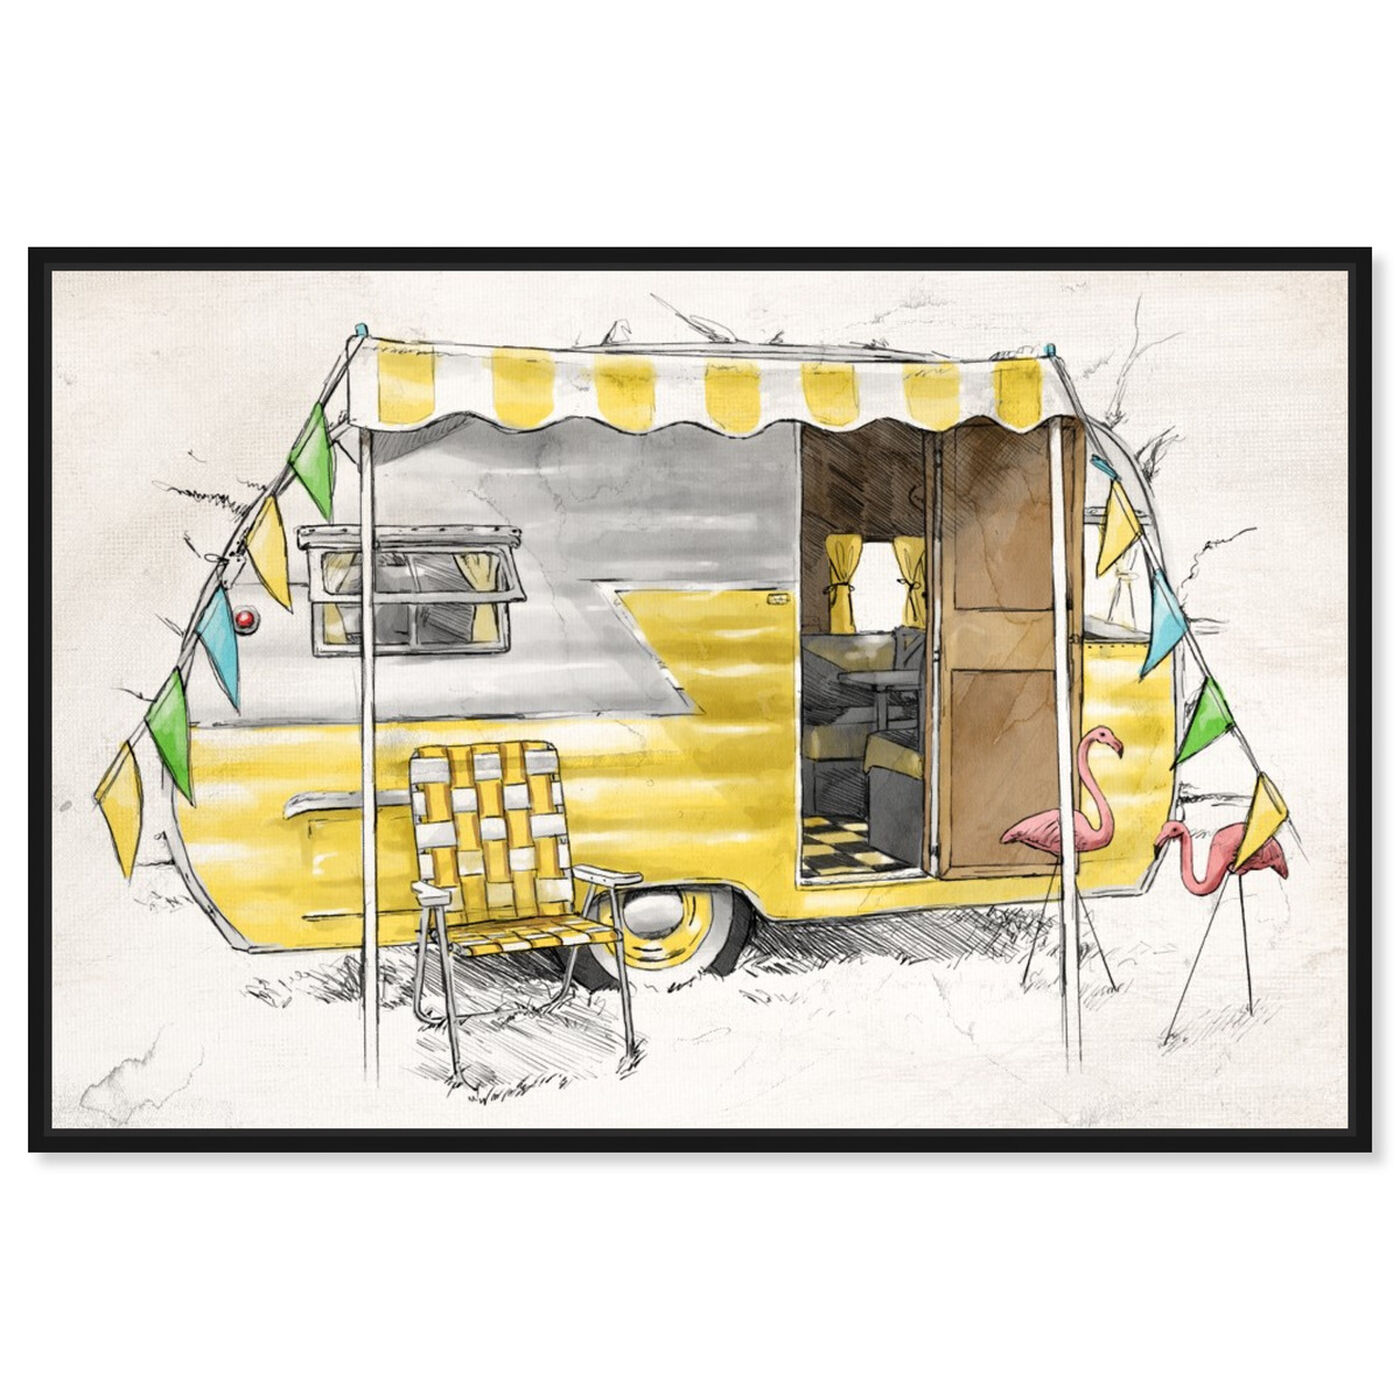 Front view of Yellow Camper featuring entertainment and hobbies and camping art.